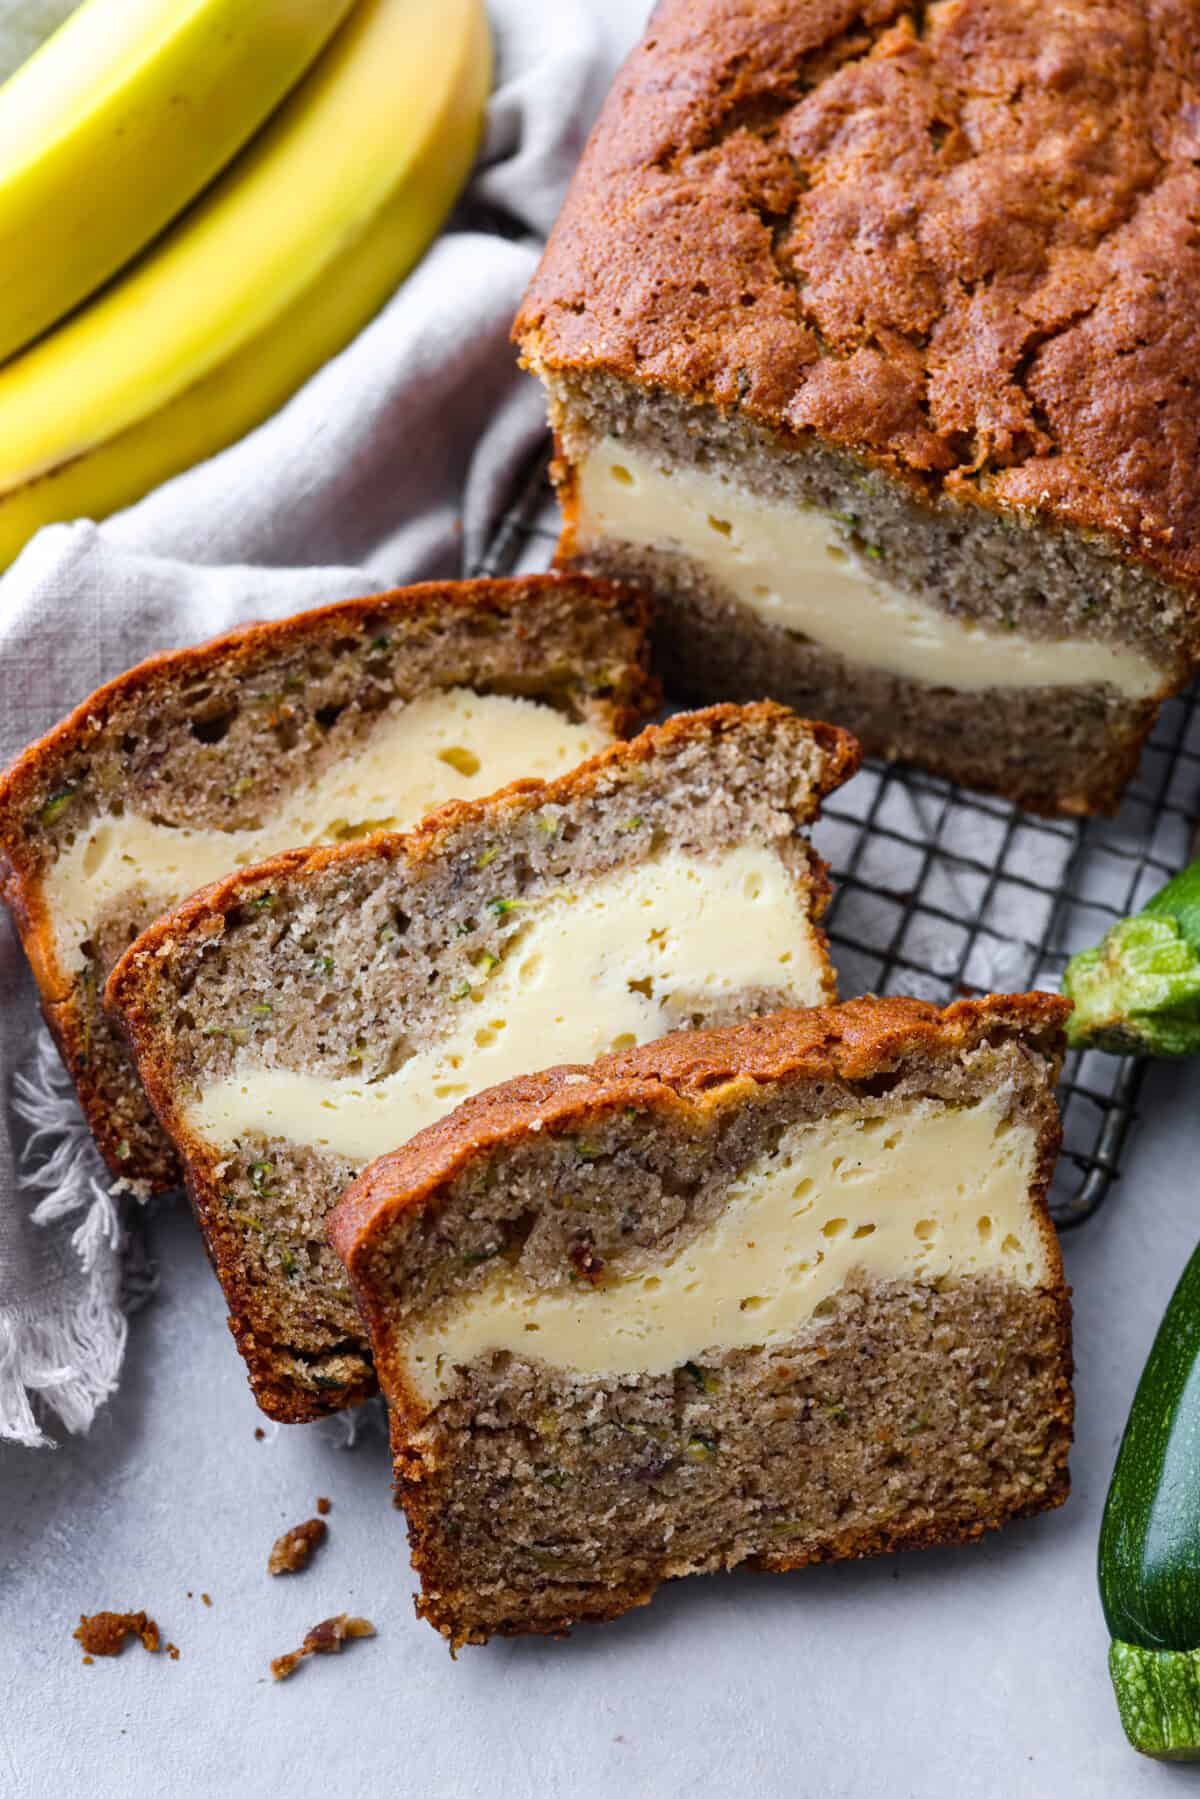 Mango Bread Recipe With Sour Cream: A Deliciously Moist and Flavorful Treat